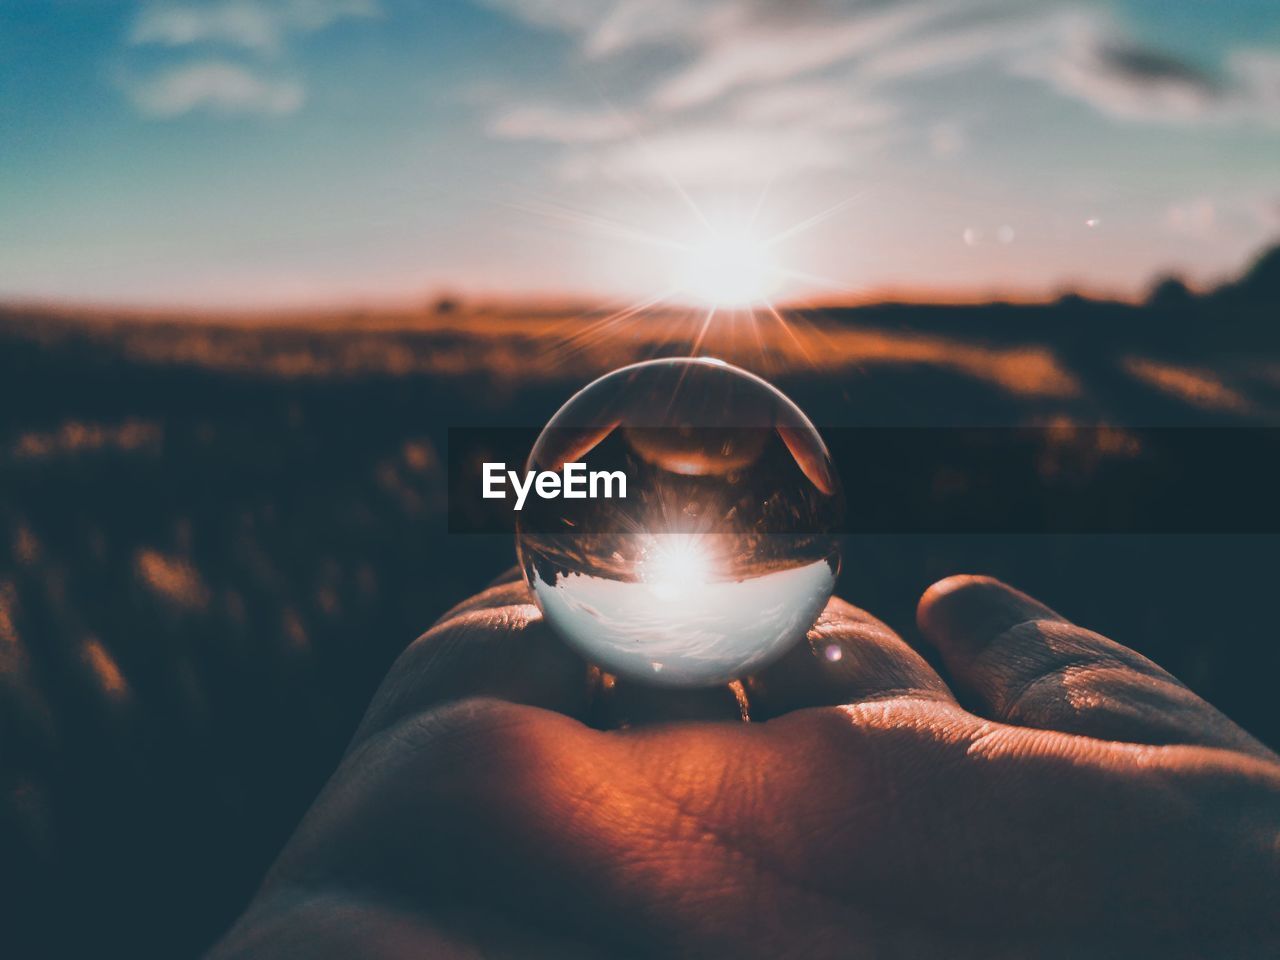 Cropped hand of person holding crystal ball against sky during sunset